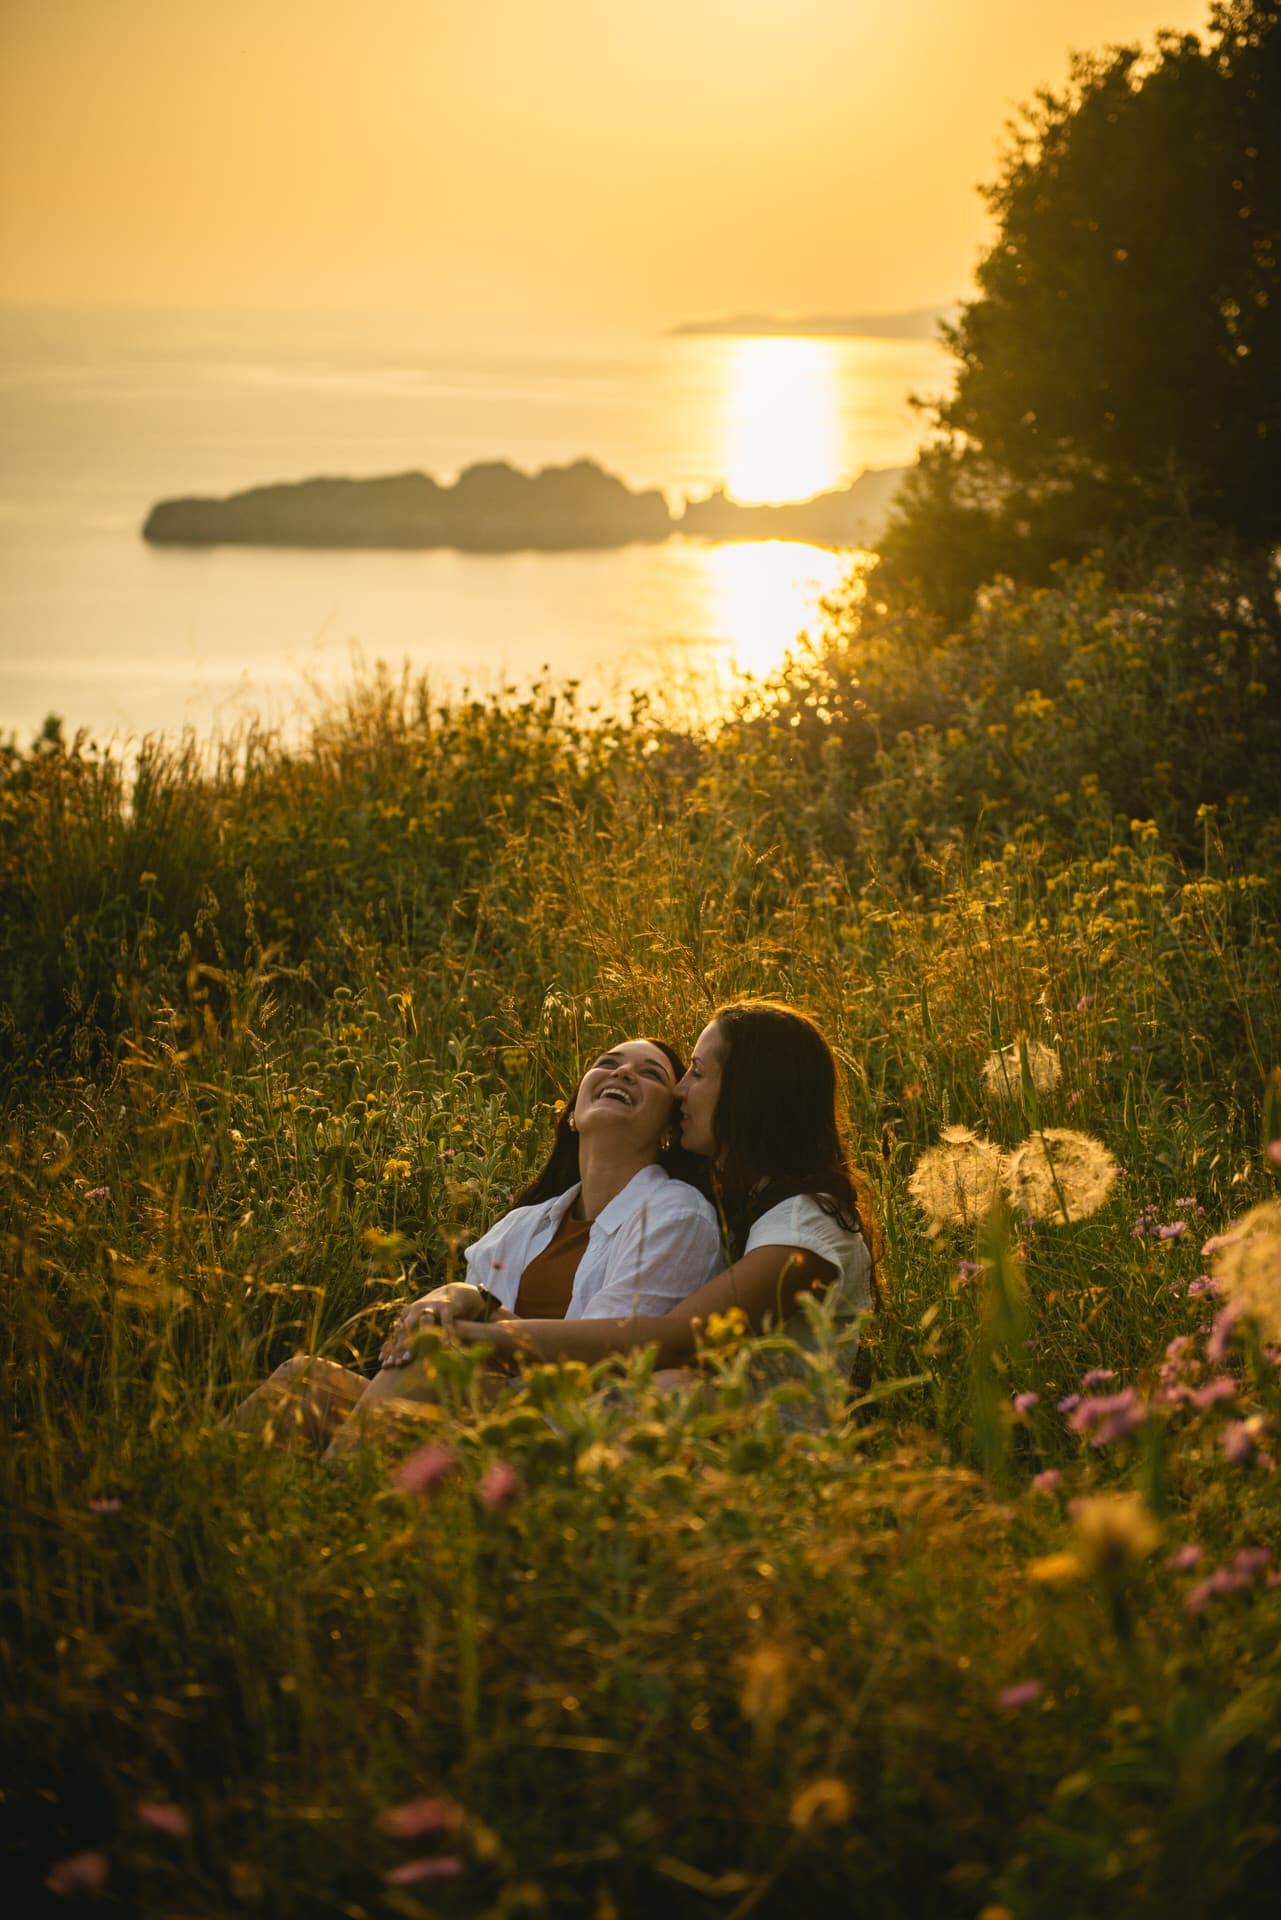 Brides sharing a tender hug while seated in the soft grass, creating a heartwarming moment in Corfu.